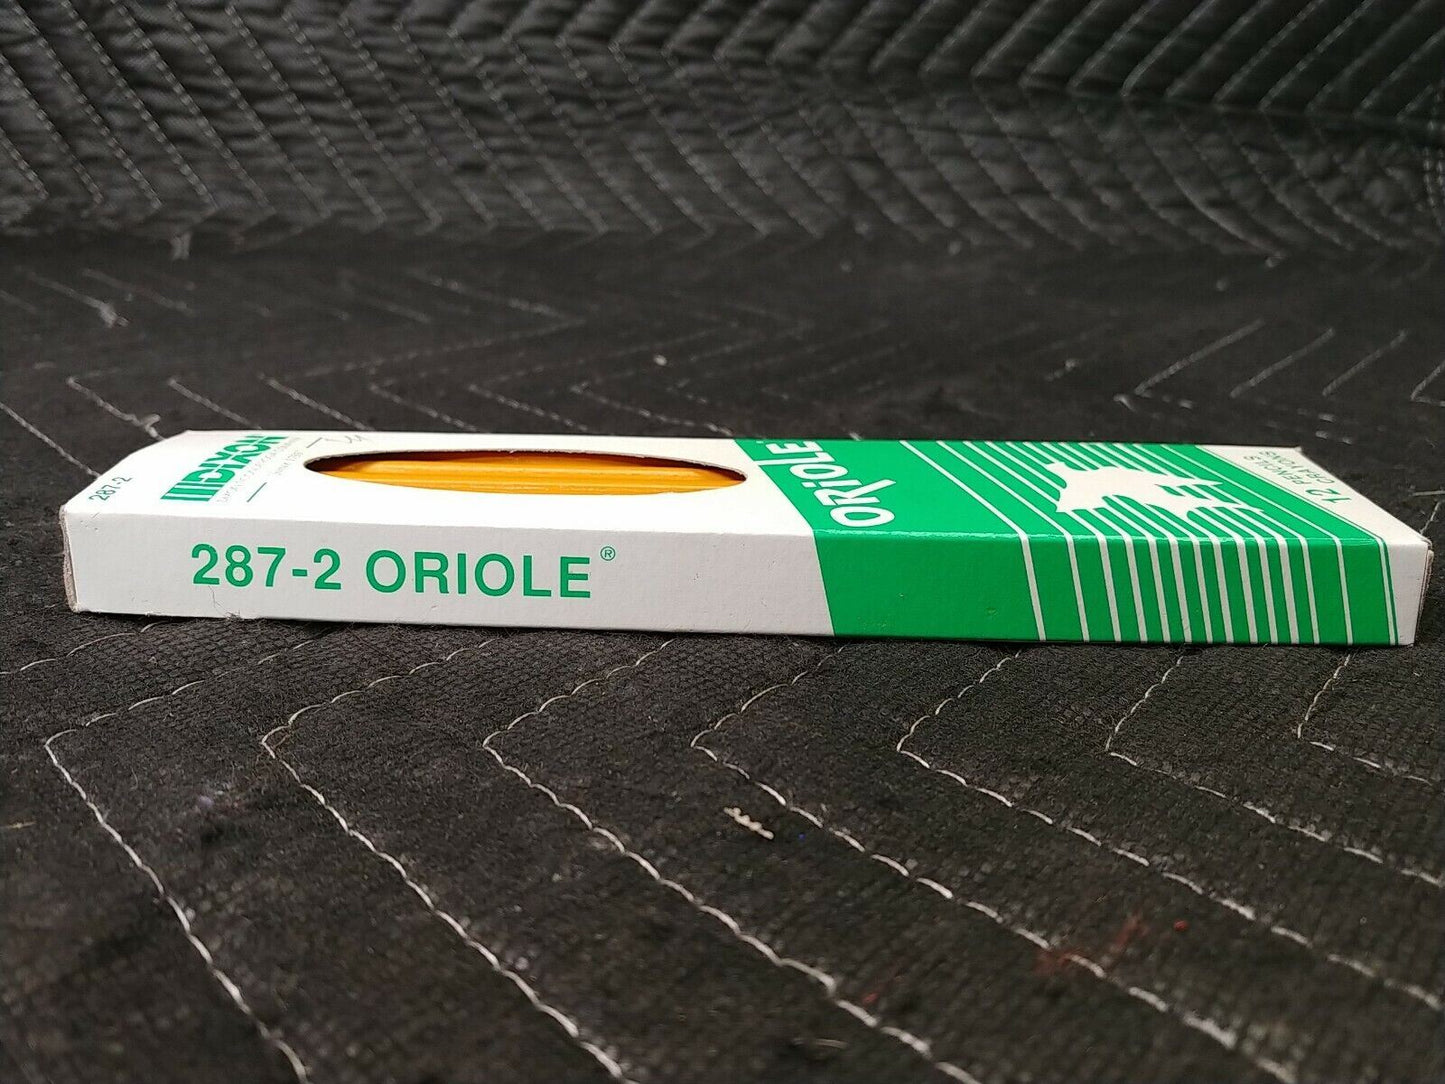 New! Vintage Dixon Ticonderoga Oriole 287-2 Pencils #2 HB Made In USA Pack Of 12